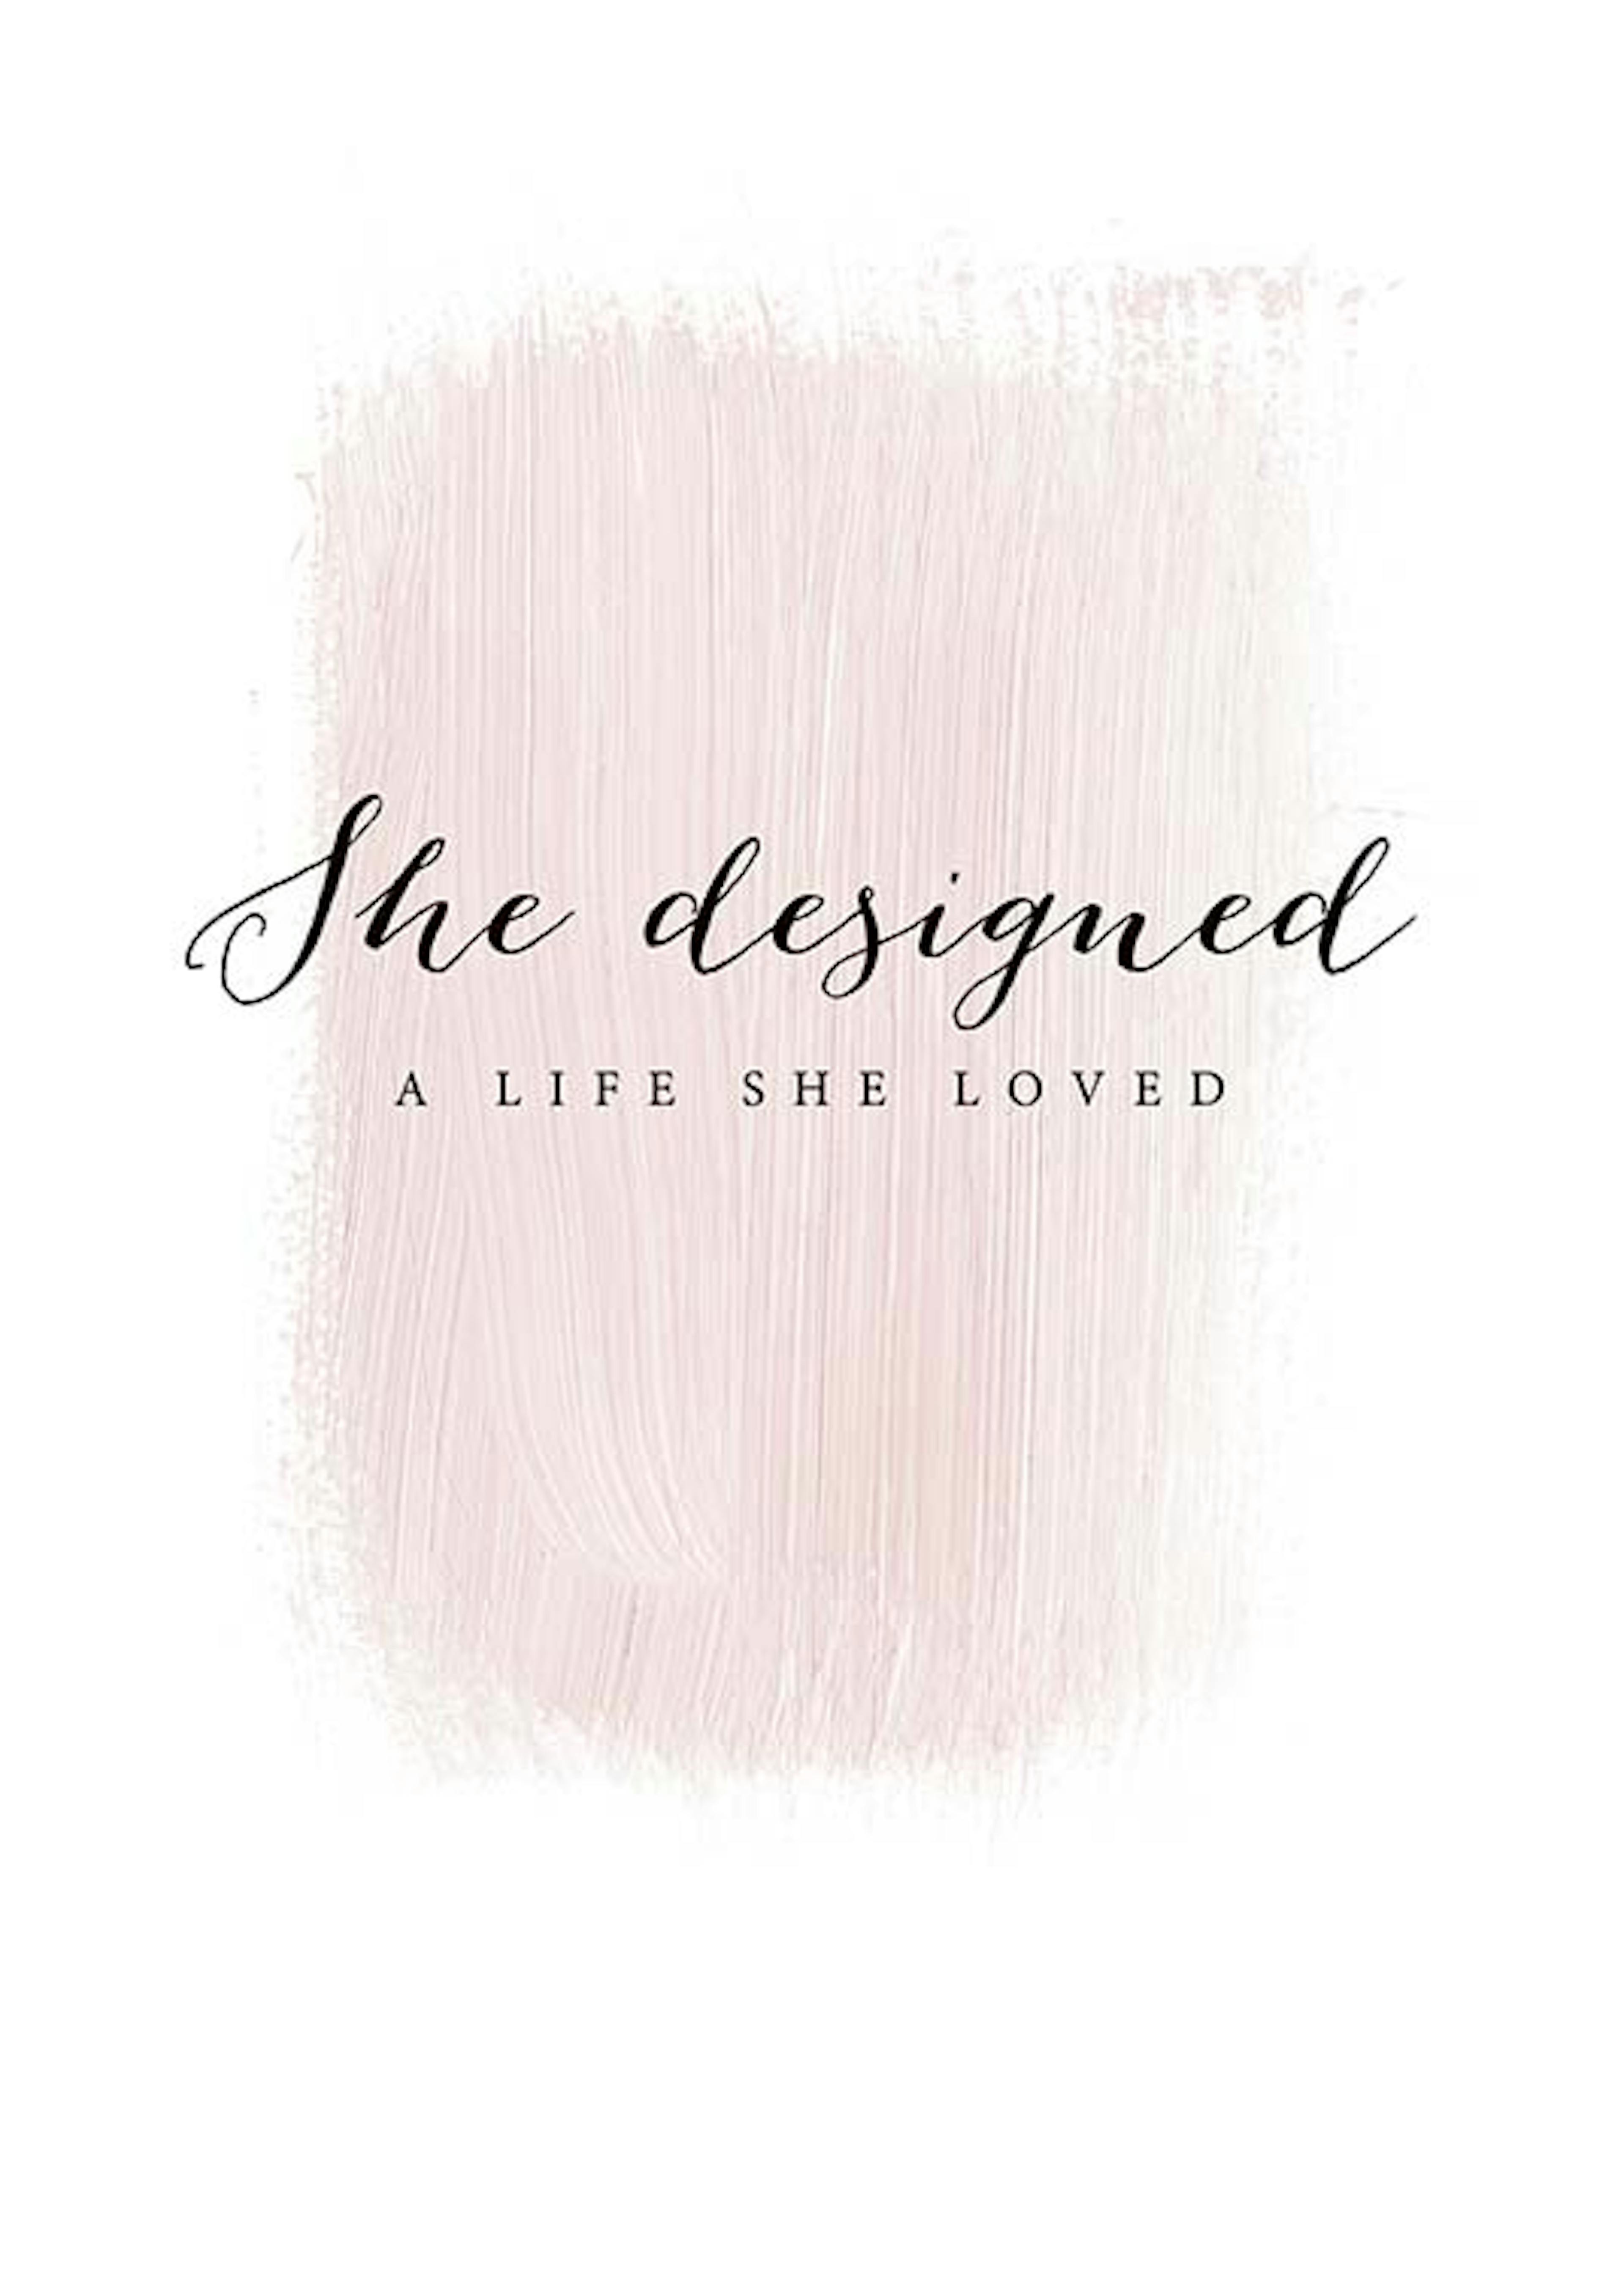 A Life She Loved Print 0